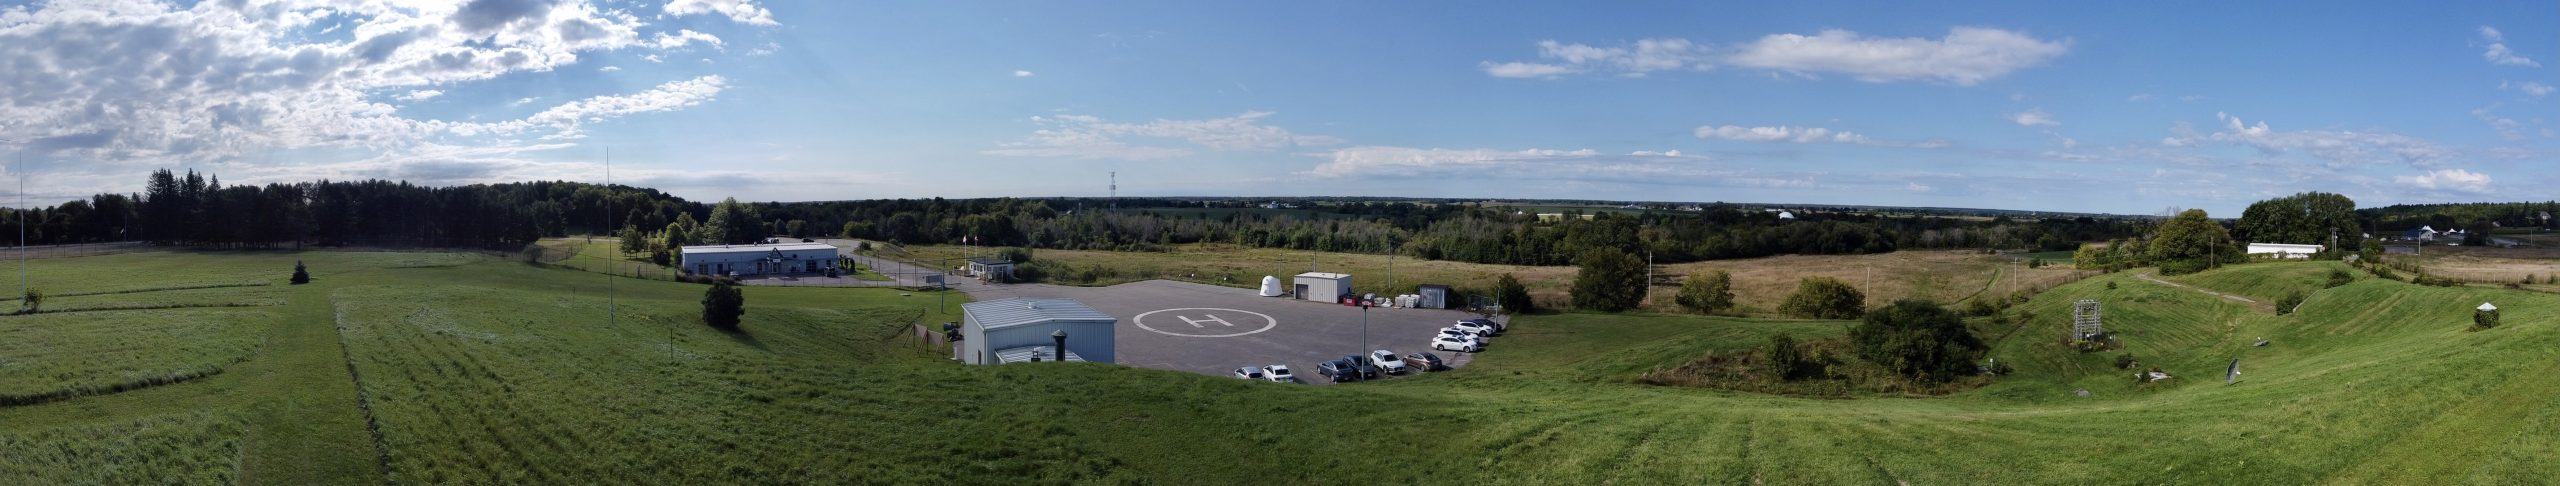 Panorama view of the Diefenbunker hillside and of rural Carp.